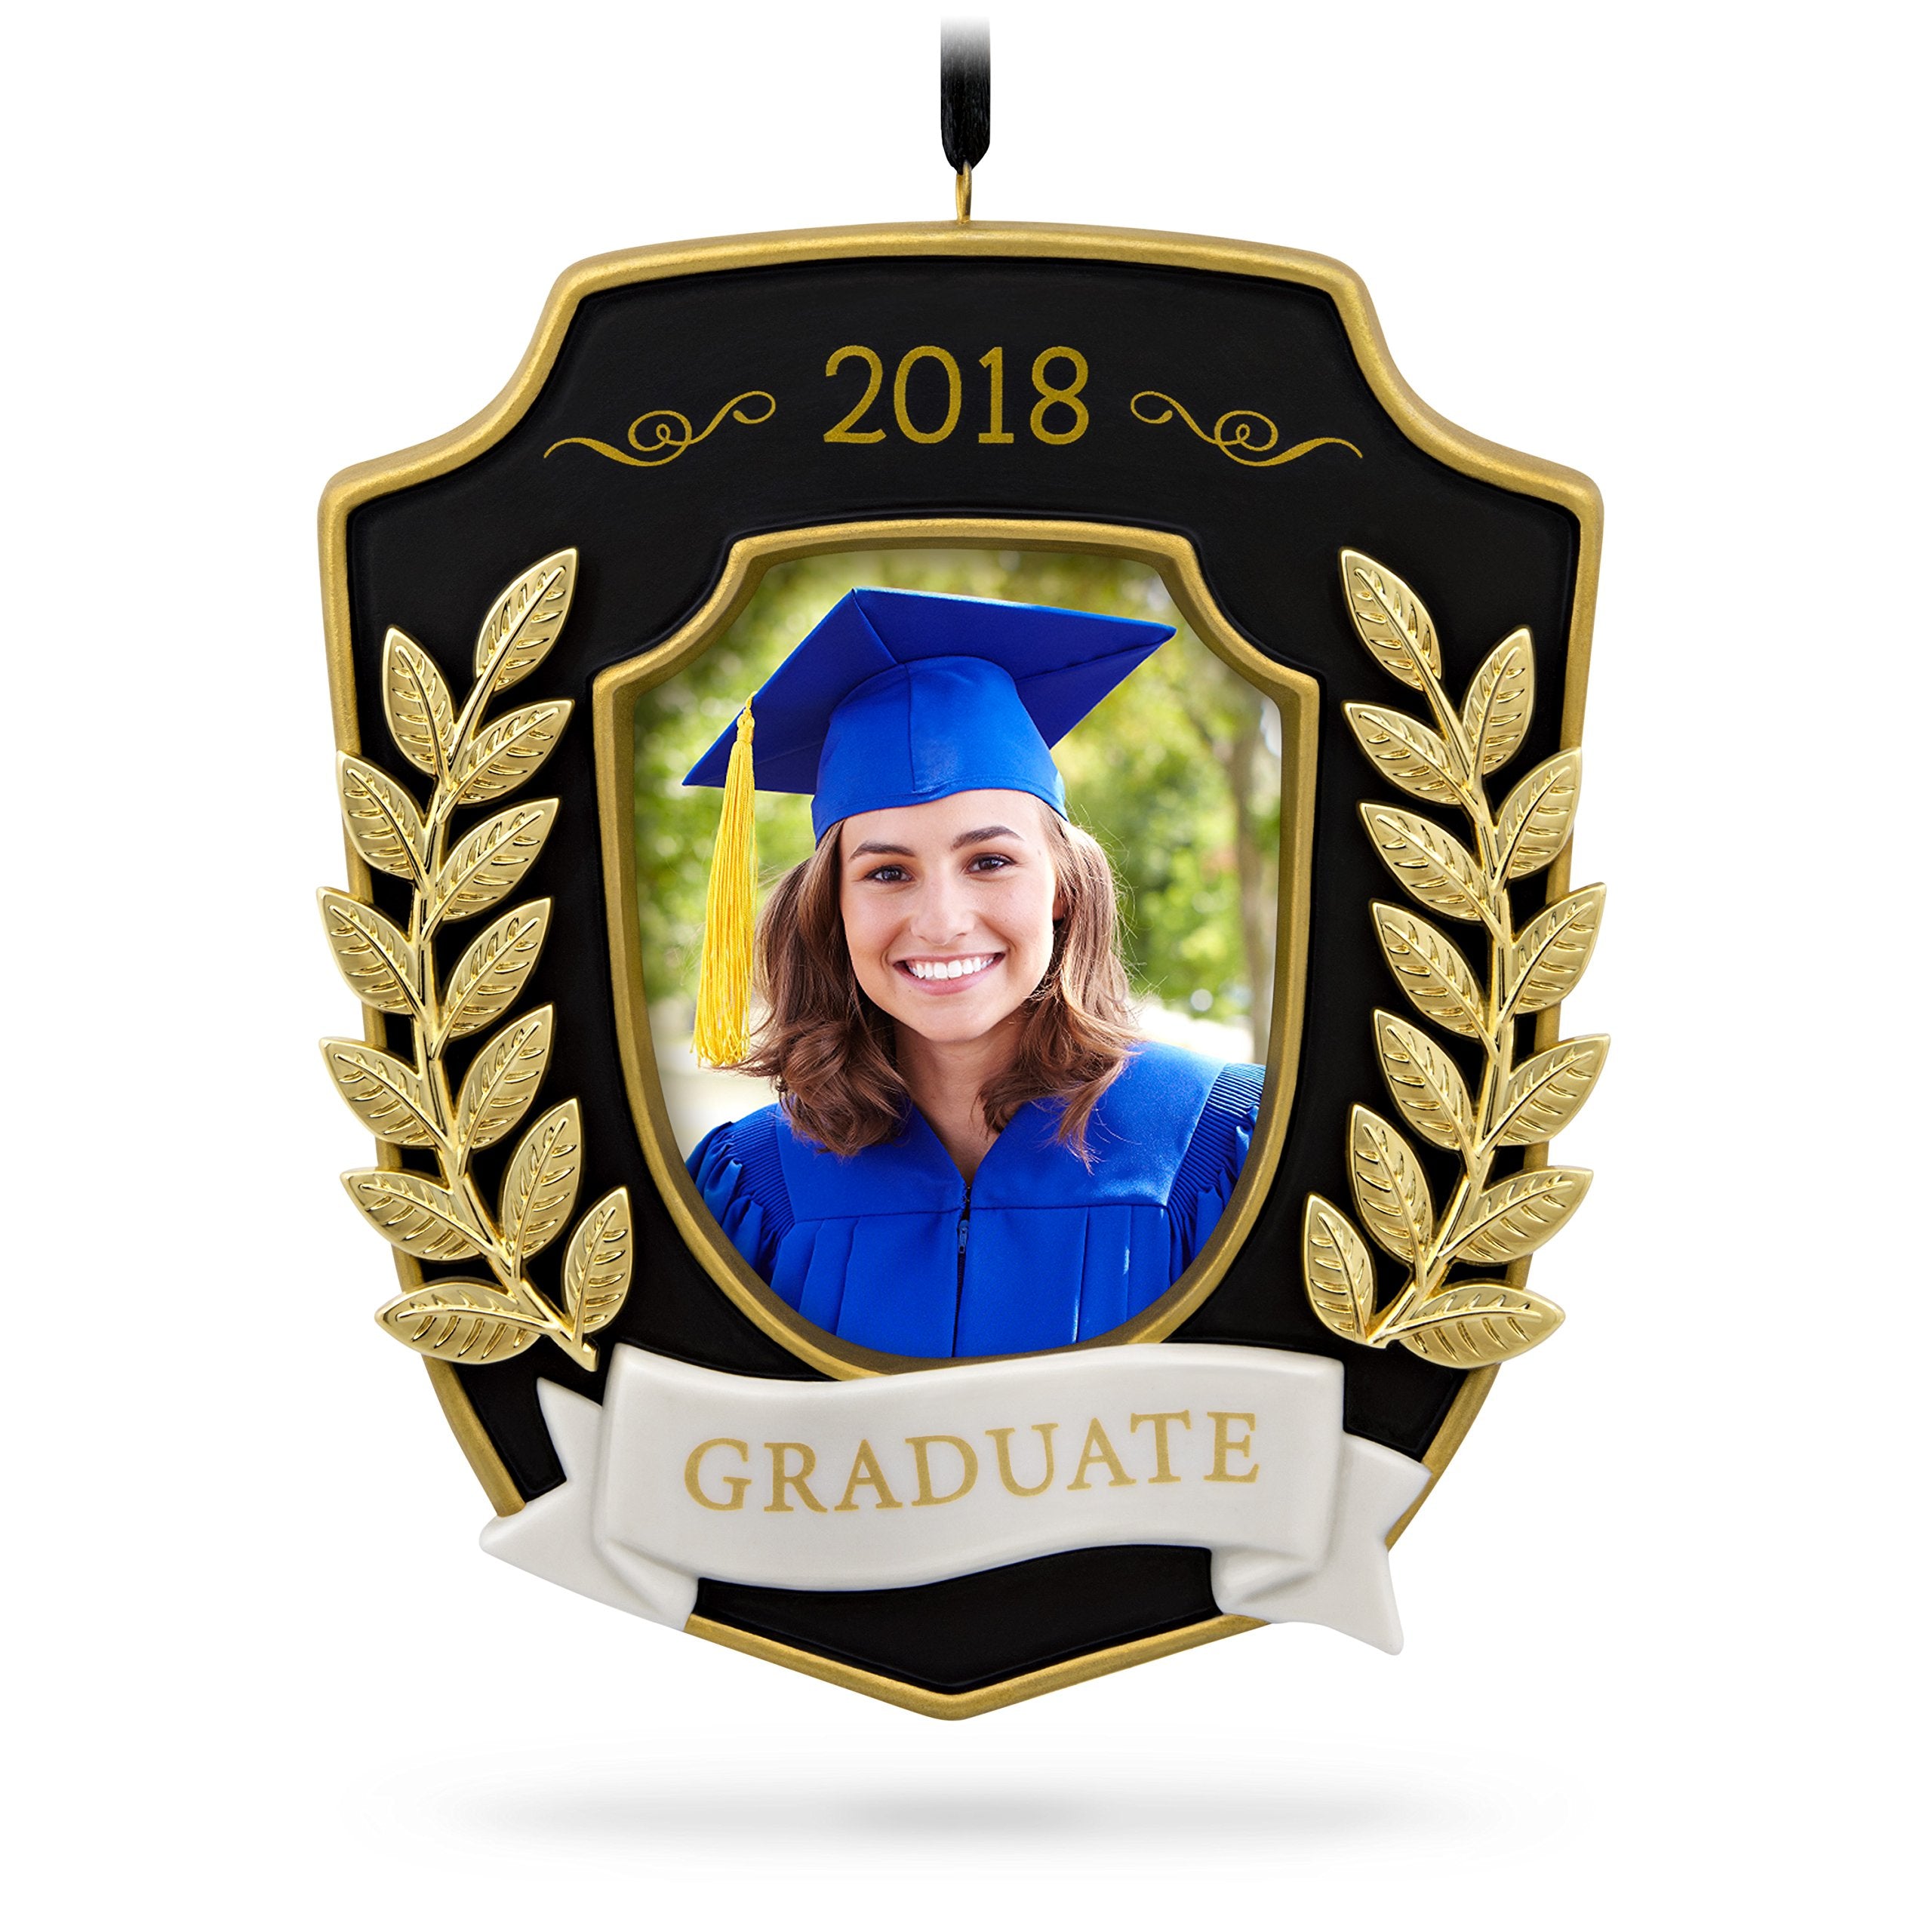 Hallmark Keepsake Christmas Ornament 2018 Year Dated Graduation Gift Congratulations Porcelain and Metal Picture Frame, Photo Frame